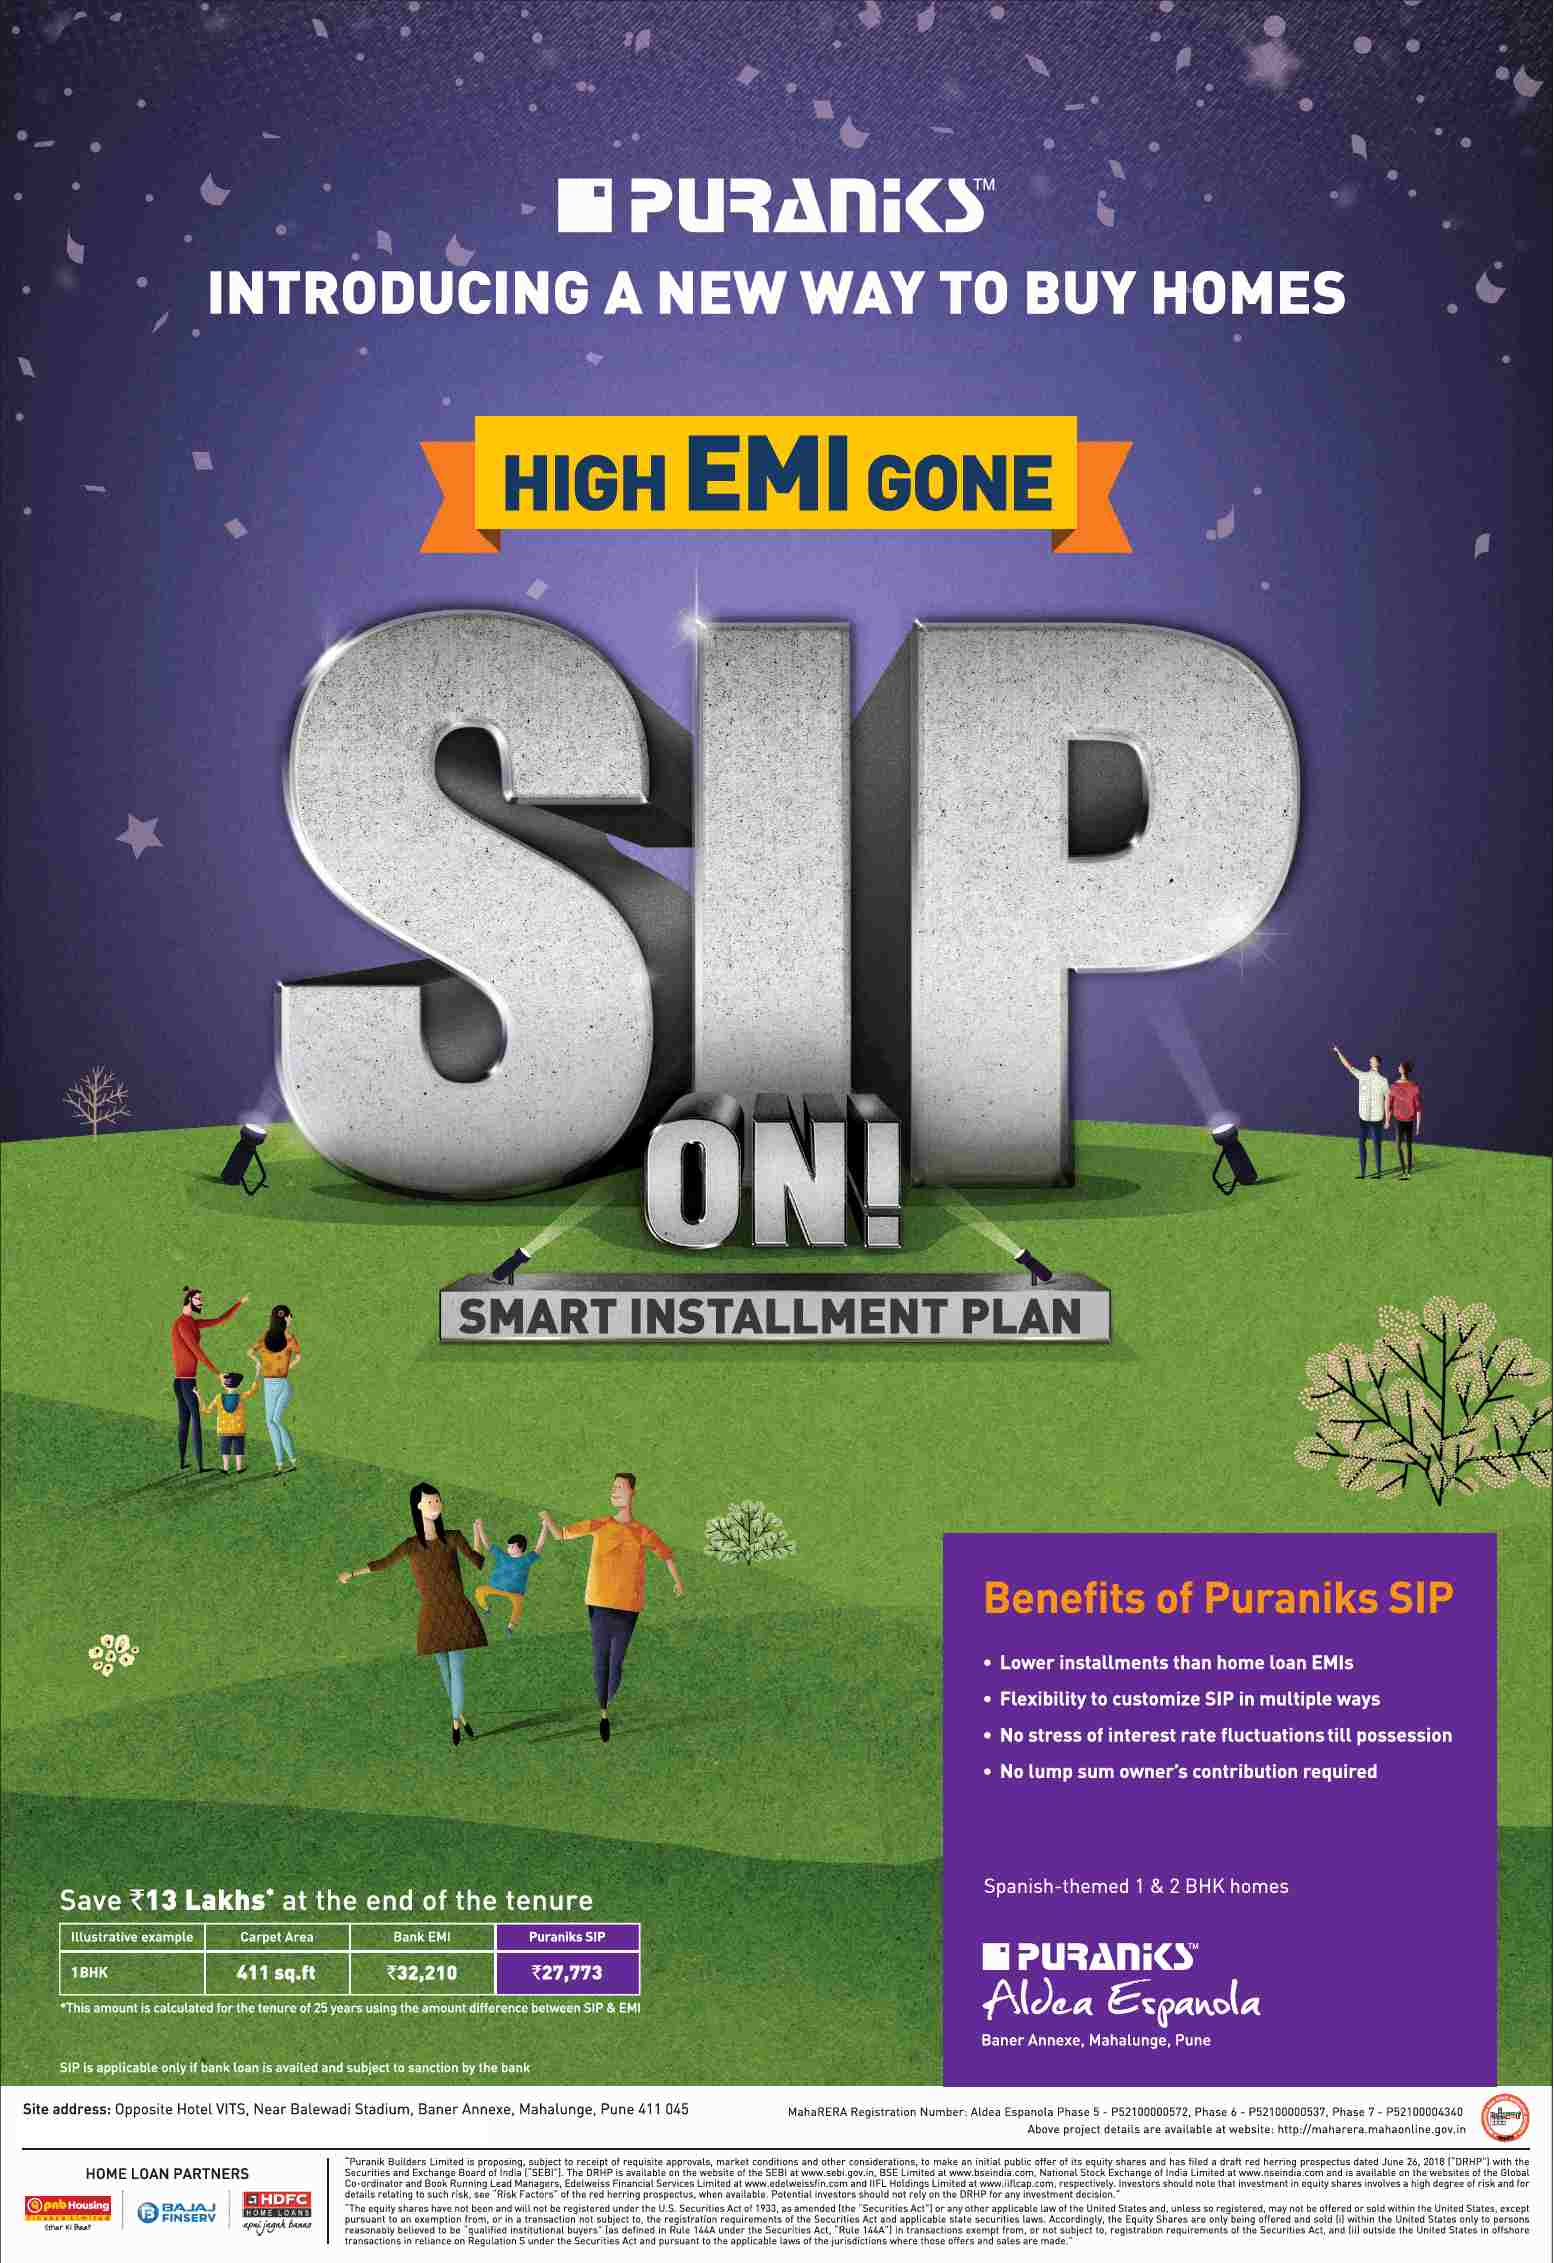 Book home & avail the benefits of SIP at Puranik Aldea Espanola in Pune Update